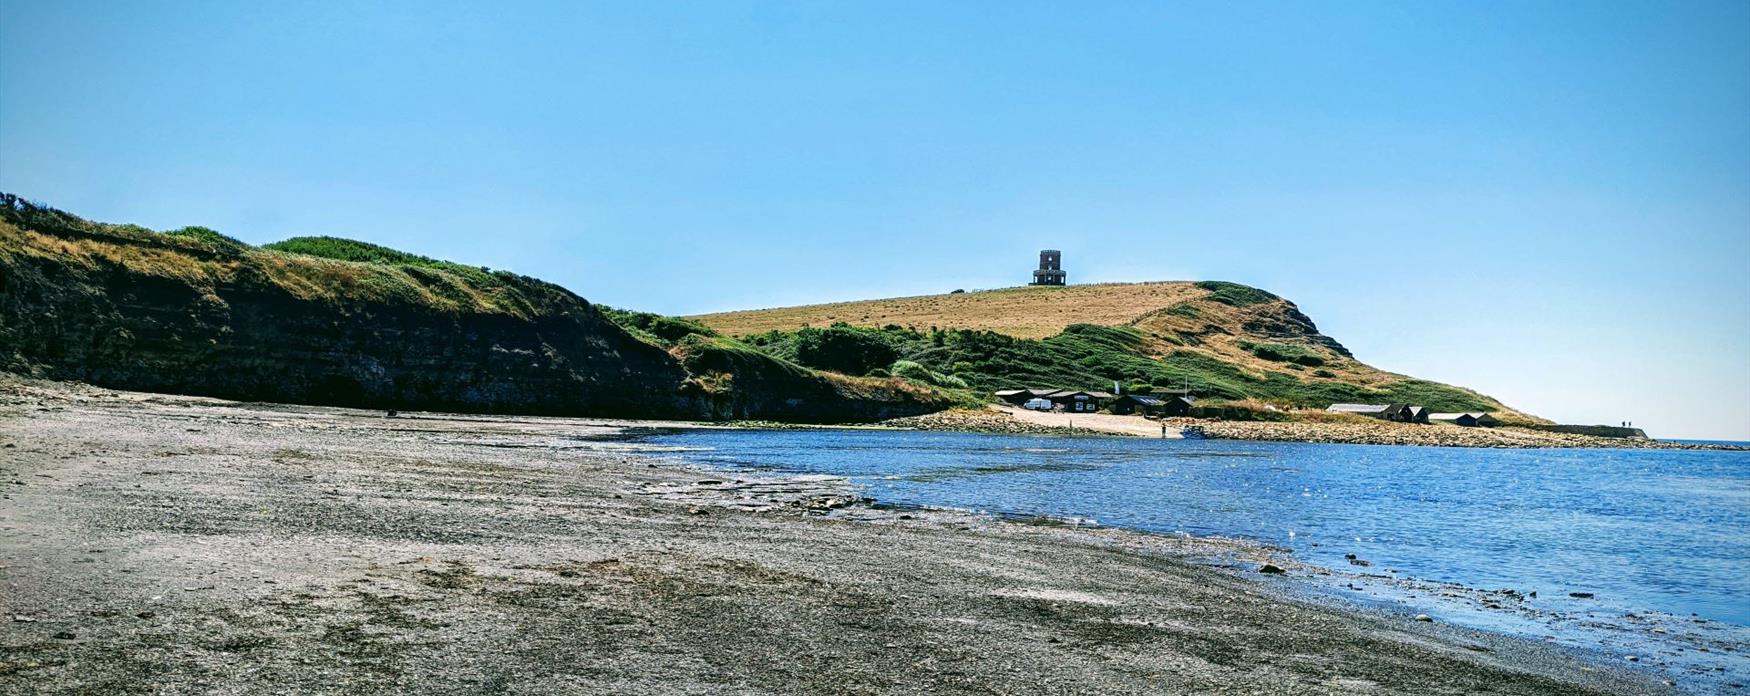 A view of Clavell Tower on top of a grassy cliff at Kimmeridge. The beach the photographer is on has pebbles and large mudflat areas. The sea to the right of the image is bright blue and the weather is calm.